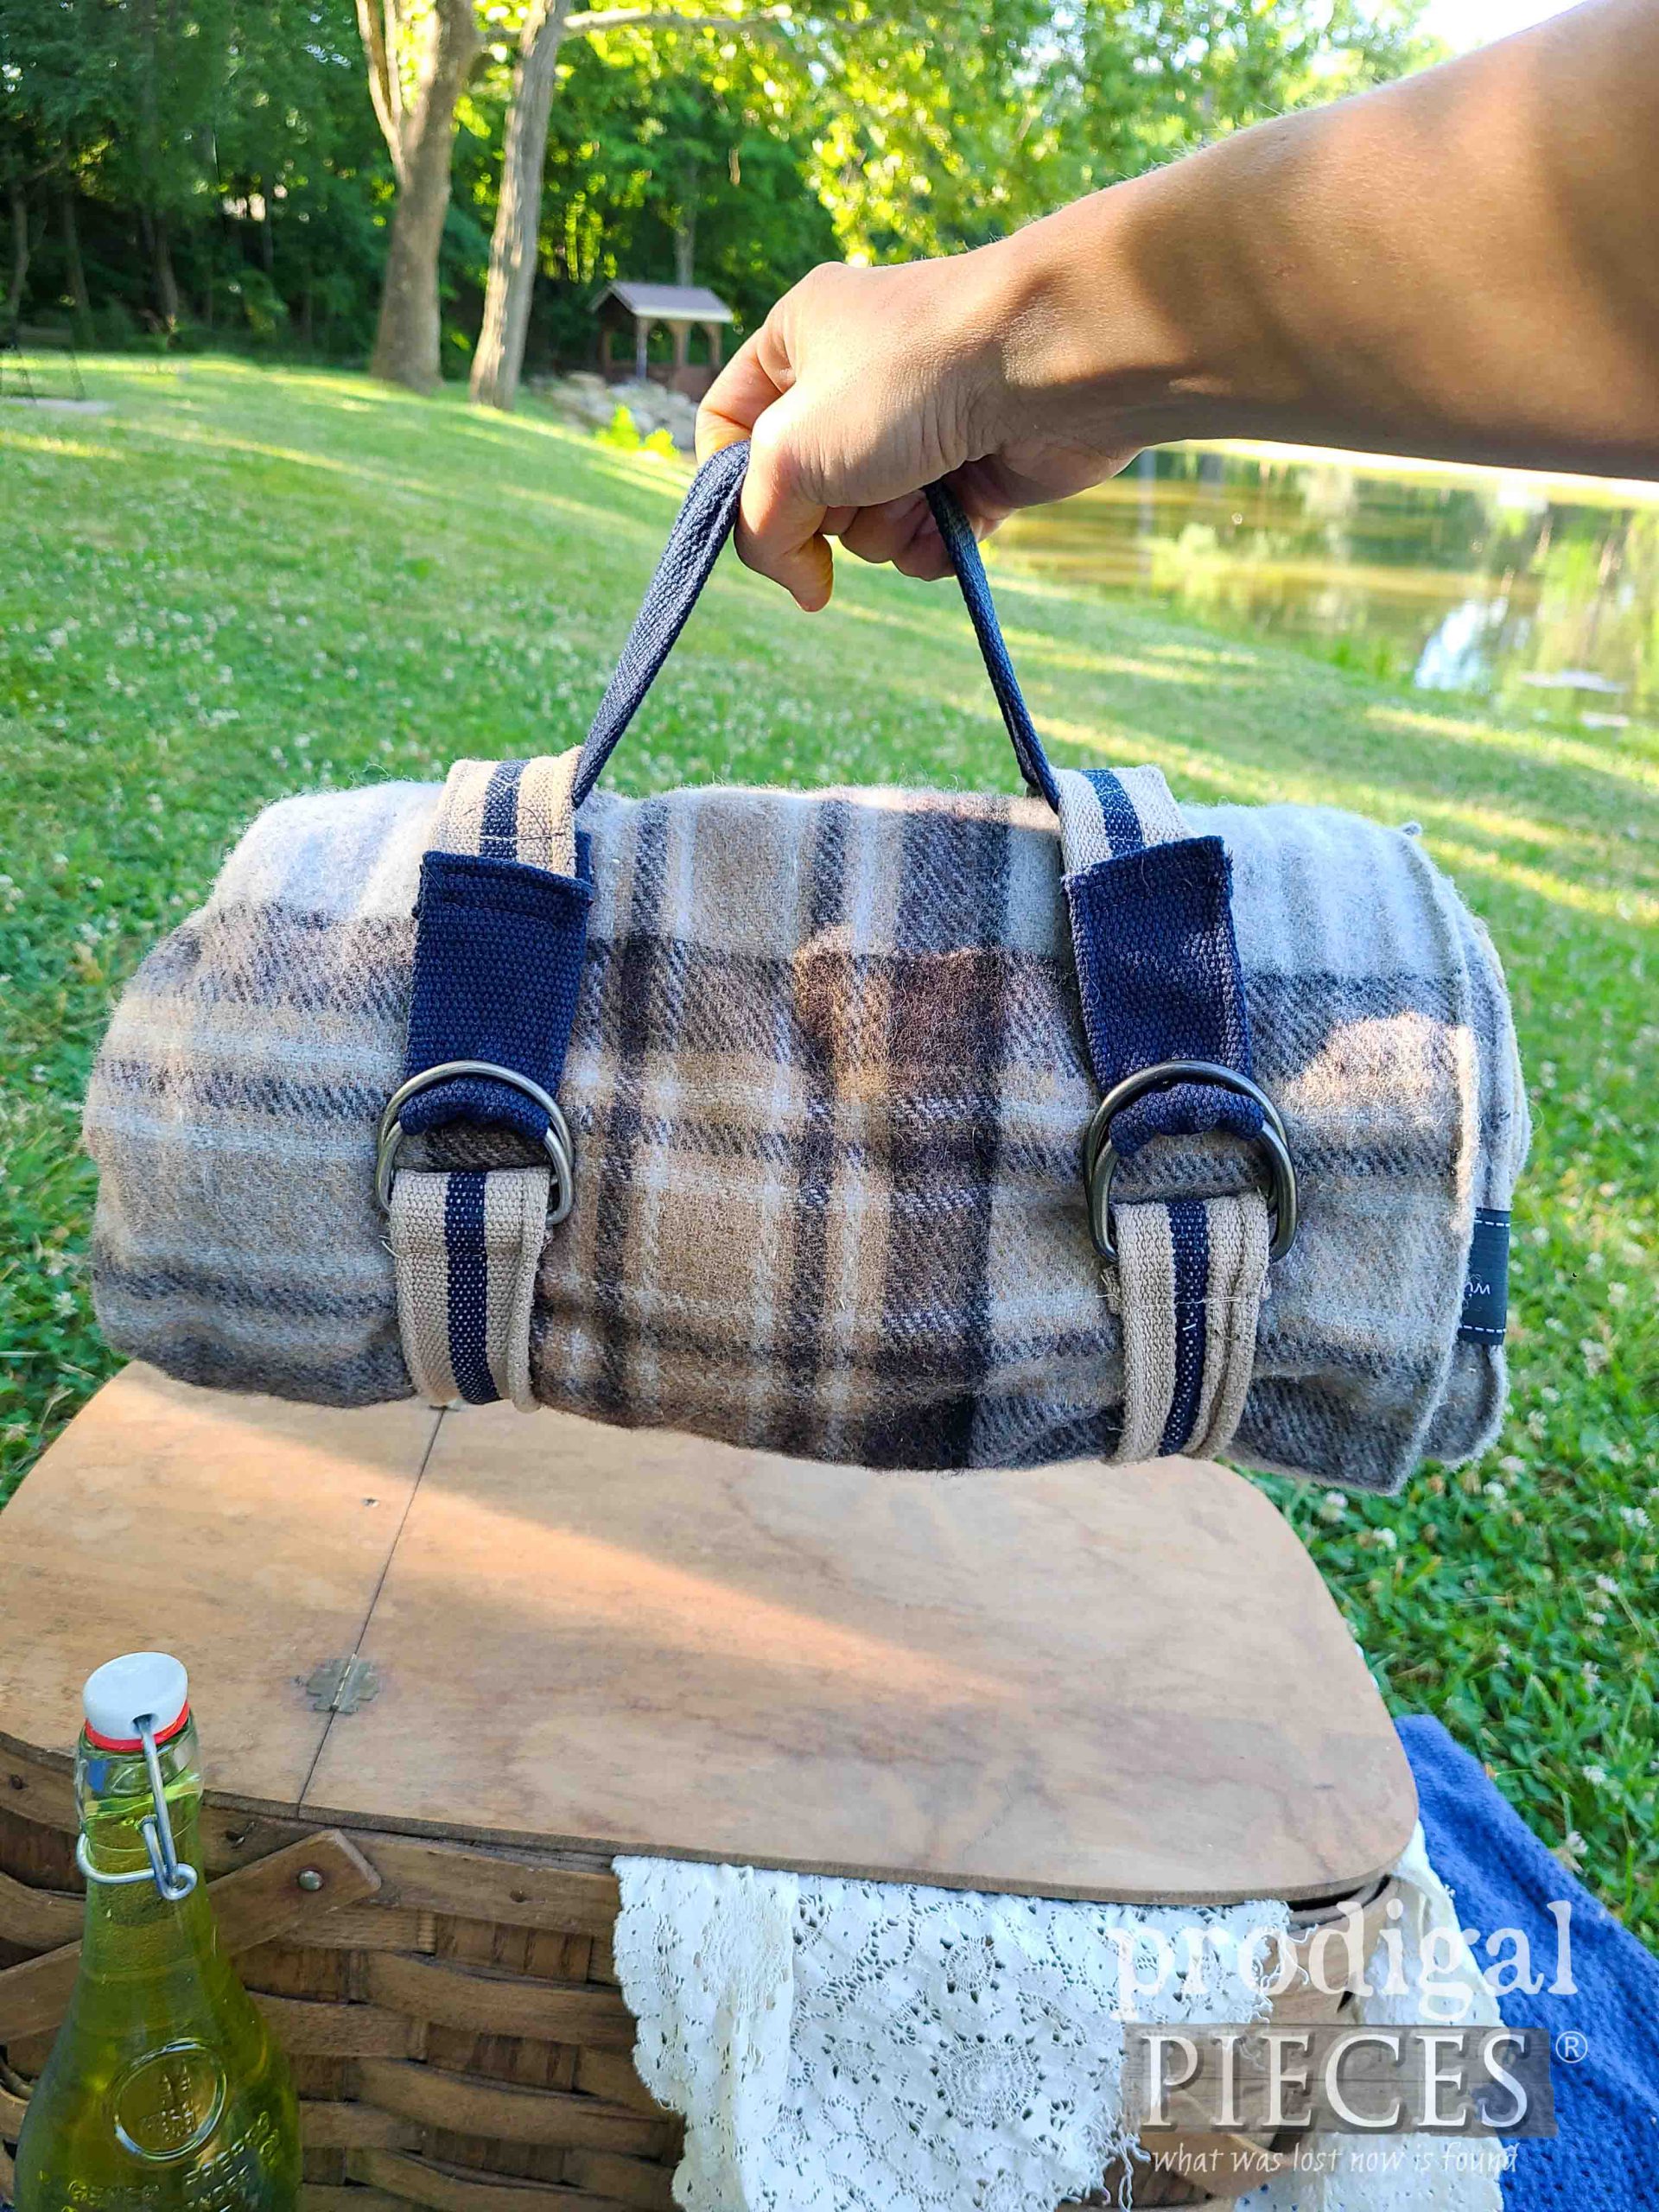 DIY Picnic Blanket Carrier from Upcycled Belts by Larissa fof Prodigal Pieces | prodigalpieces.com #prodigalpieces #handmade #upcycled #picnic #wedding